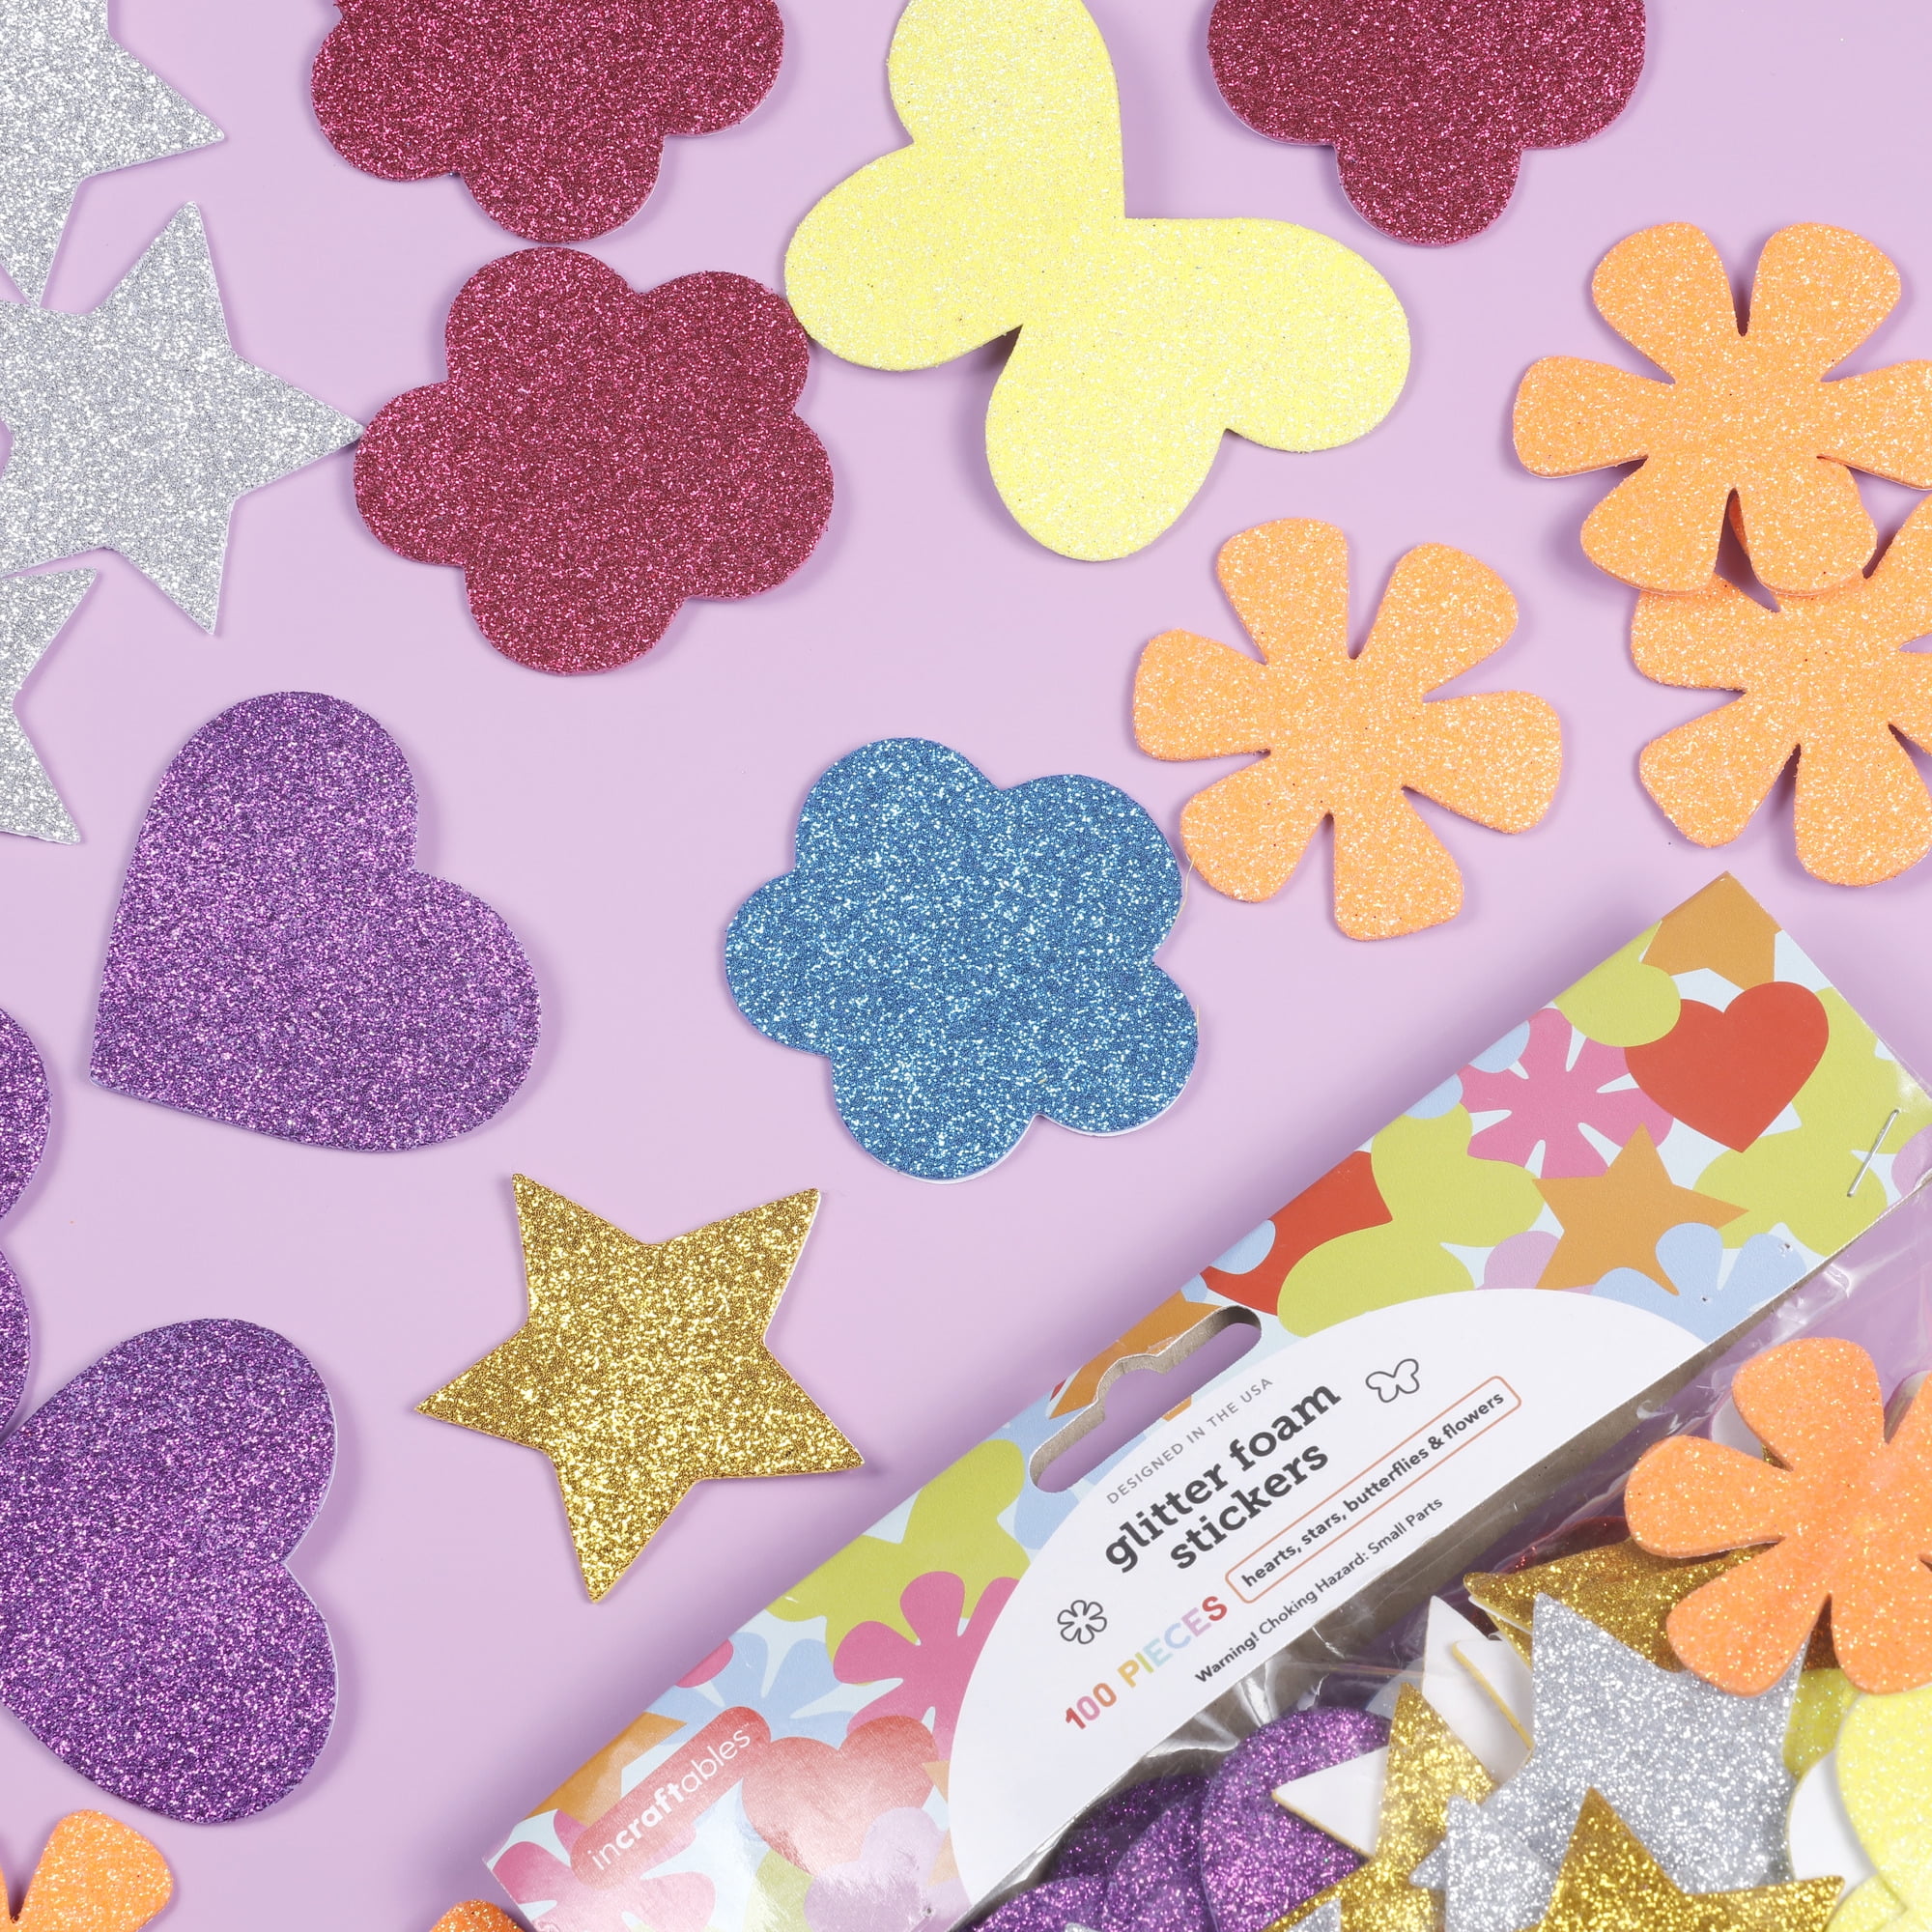 Glitter Foam Stickers, 140 Pieces Self-Adhesive Colorful Heart Star Flower Shapes Eva Foam Stickers Self Adhesive Craft Glitter Sticker for Kid's